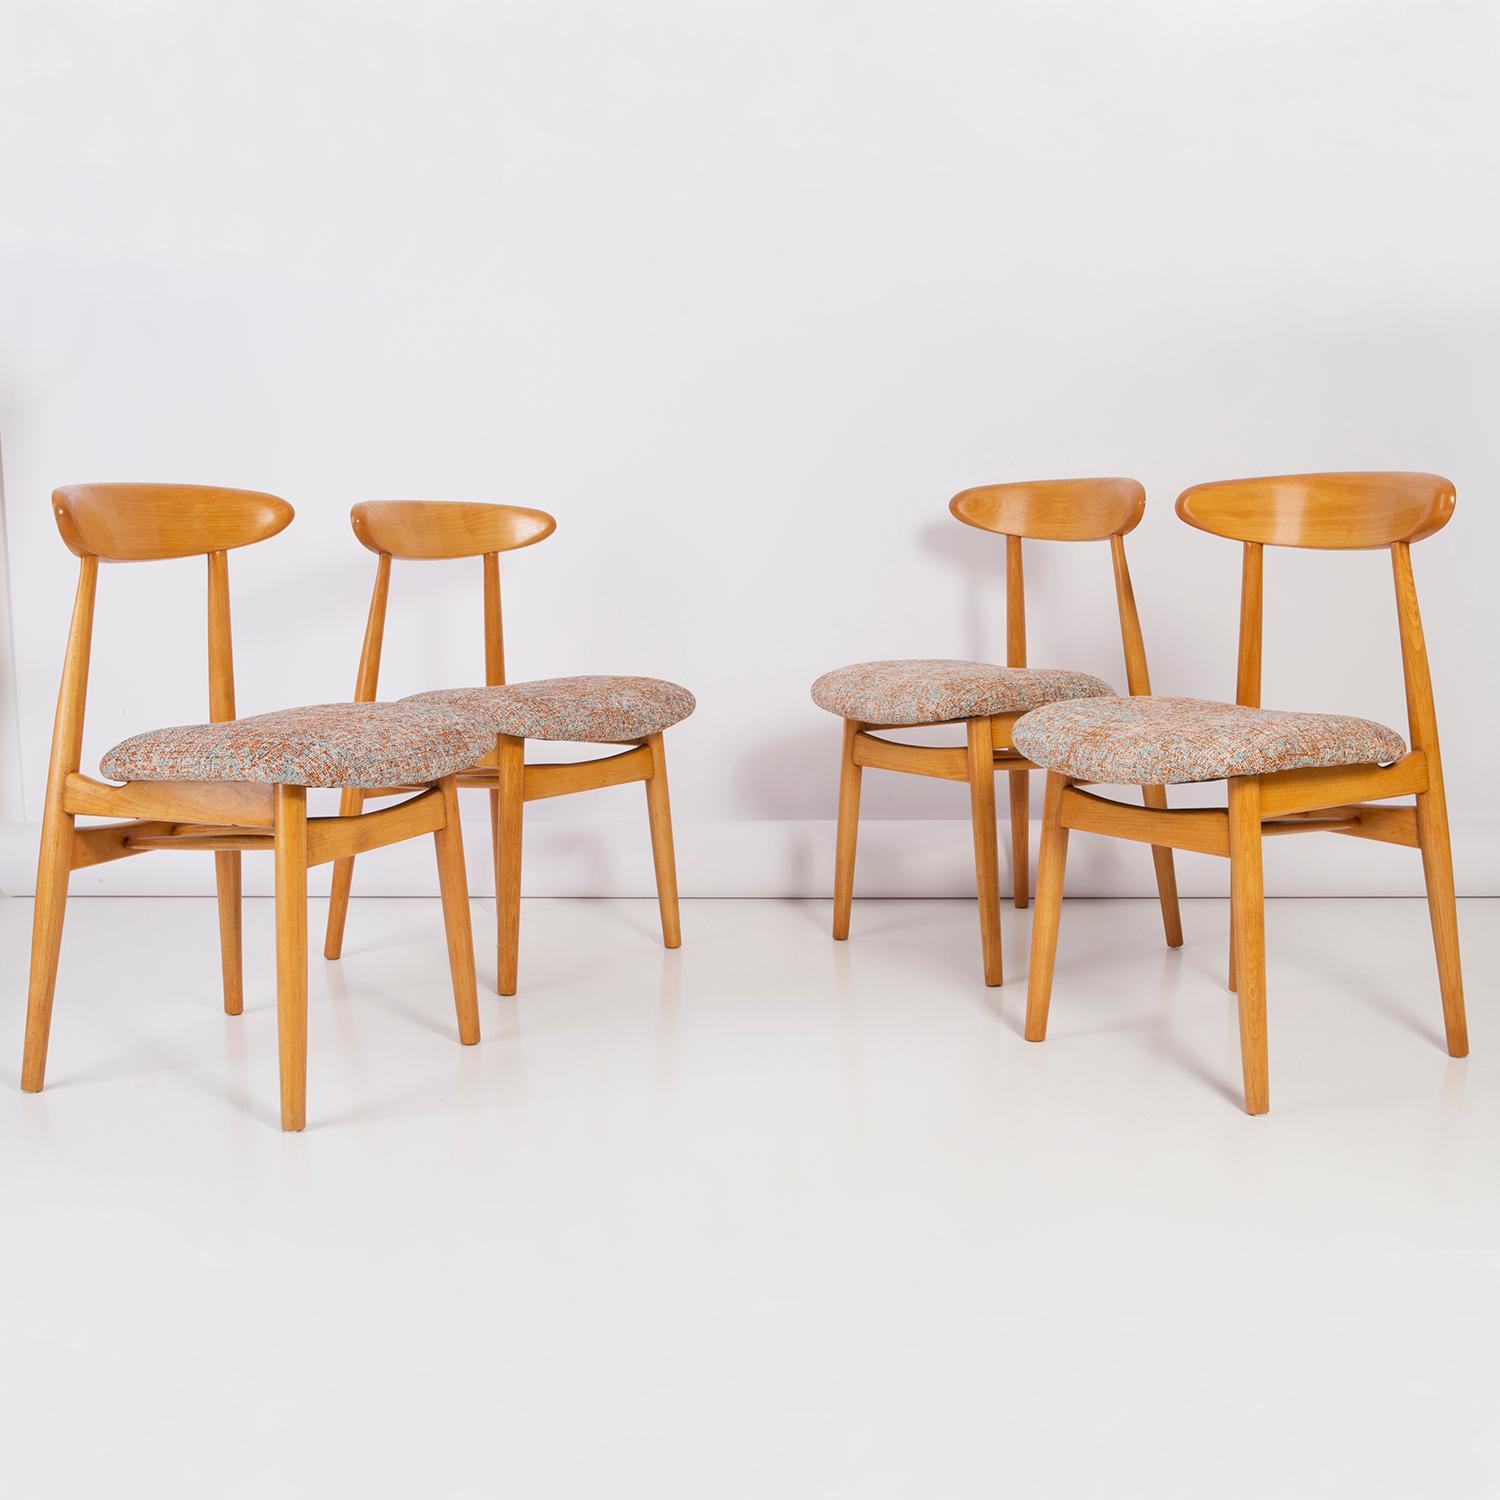 Chairs type 5908, designed in 1960s by Rajmund Teofil Halas, are one of the most recognizable projects of Polish design.

The chairs have a simple, modernist silhouette. They are characterized by streamlined, organic characteristic shapes for